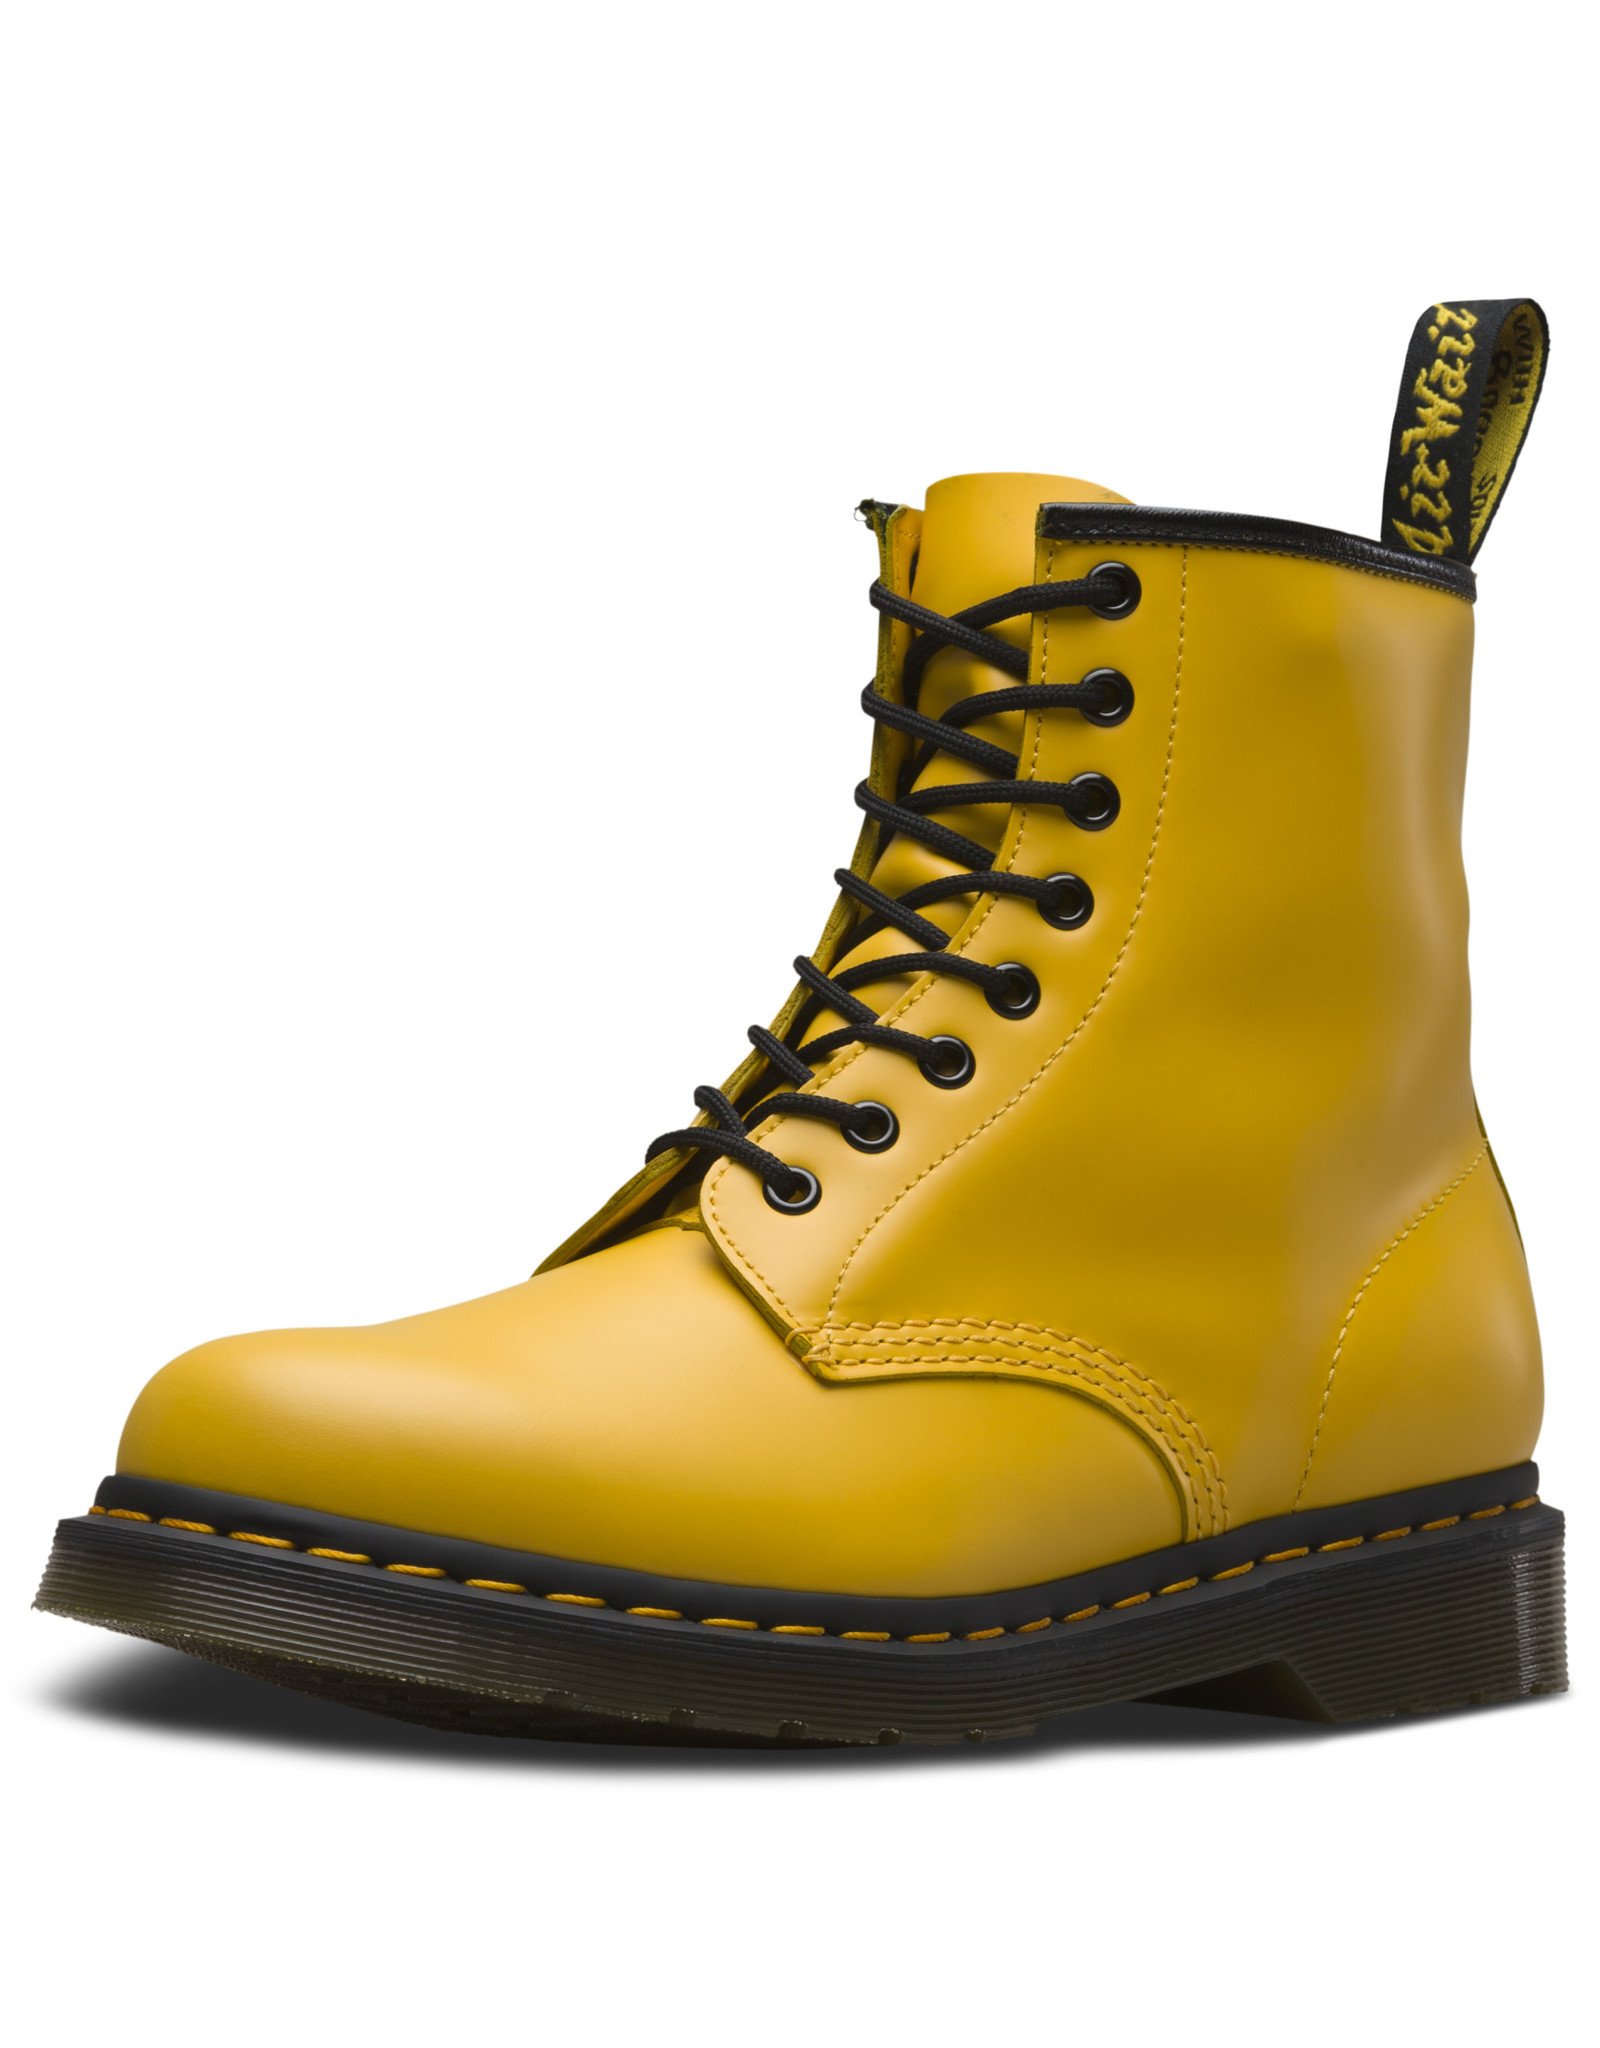 DR. MARTENS 1460 SMOOTH YELLOW 815Y-R24614700